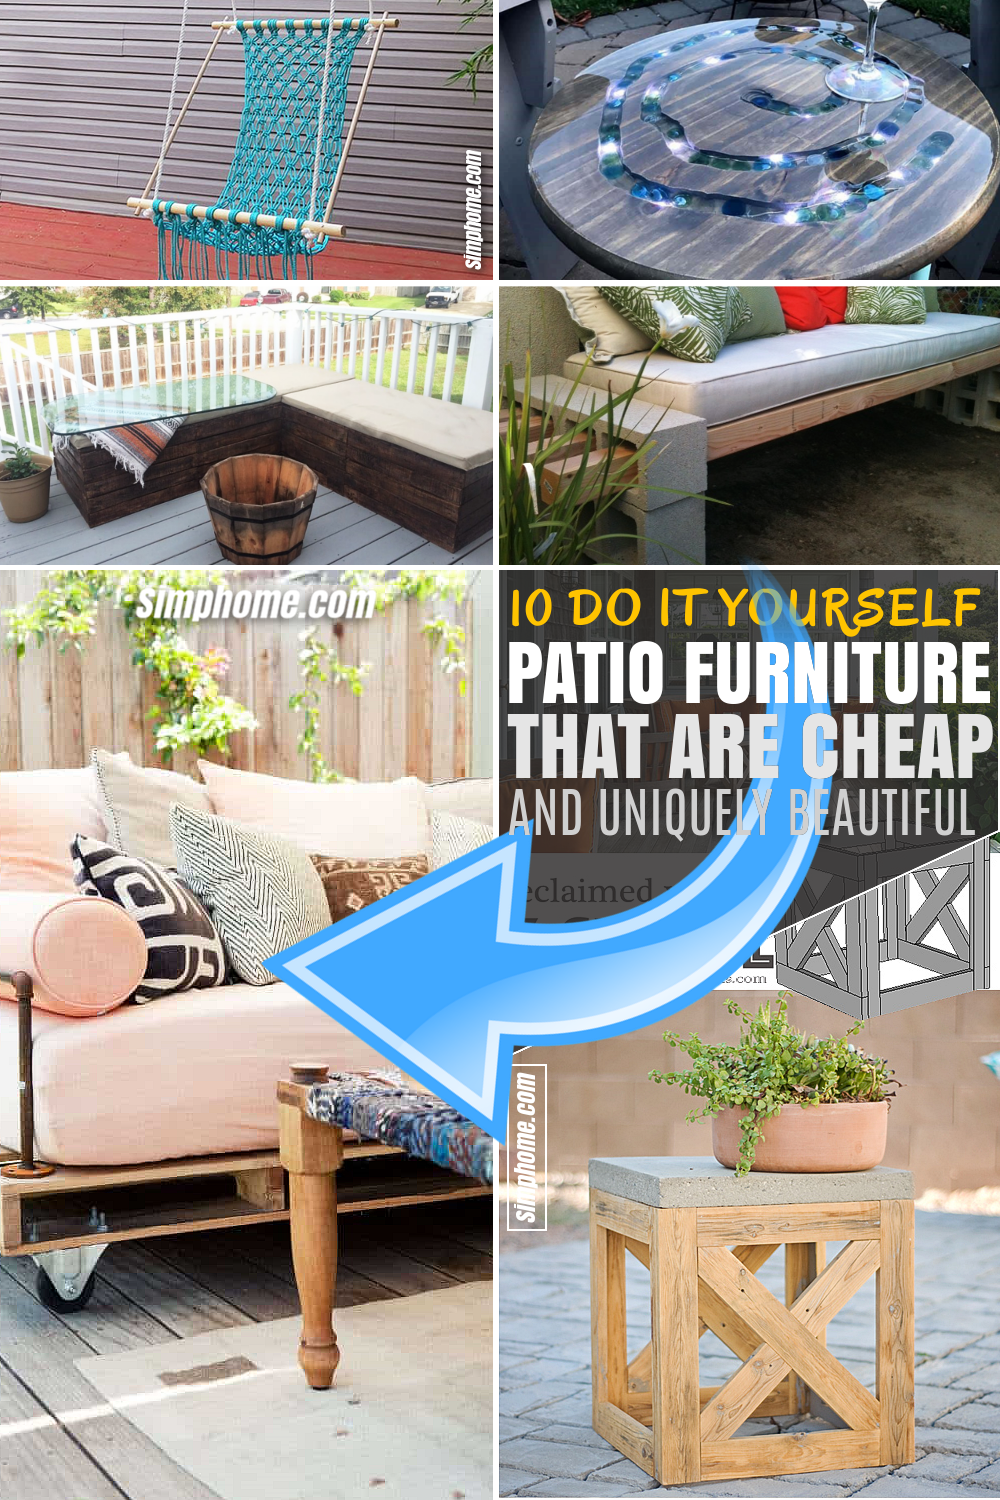 SIMPHOME.COM 10 DIY Patio Furniture Projects that are Cheap Featured Pinterest